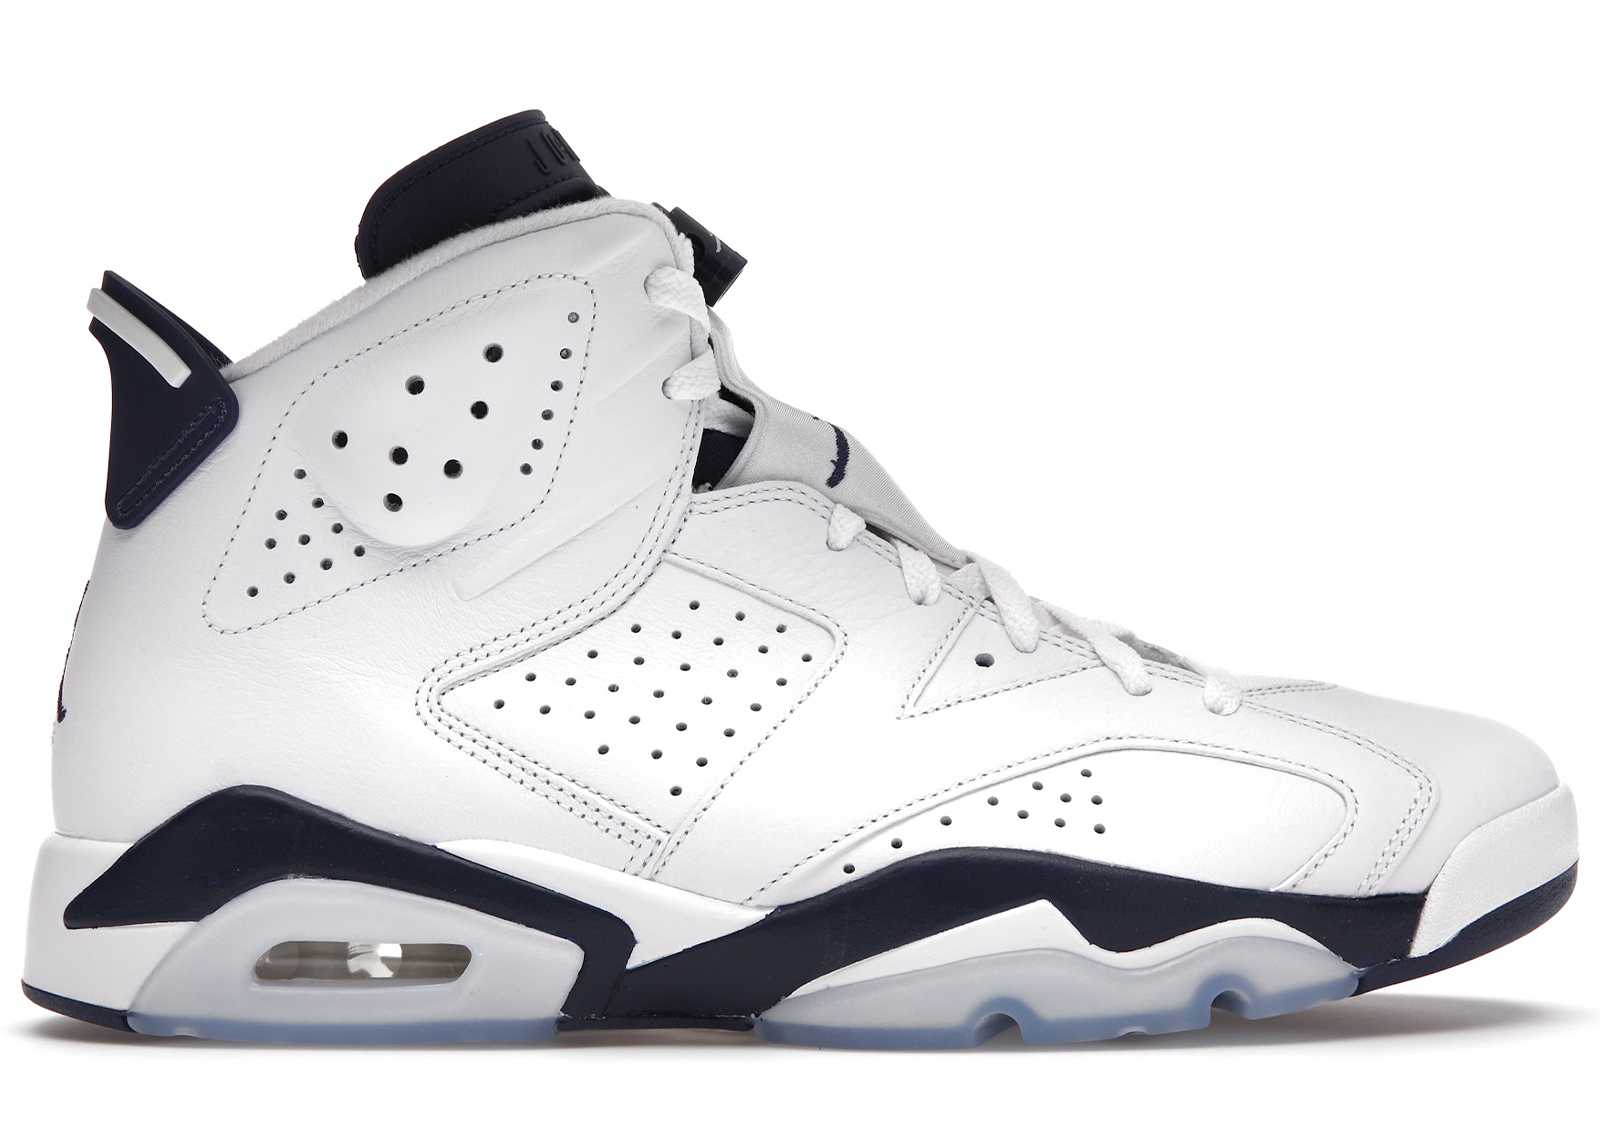 Jordan 6 - All Sizes & Colorways from $50 at StockX